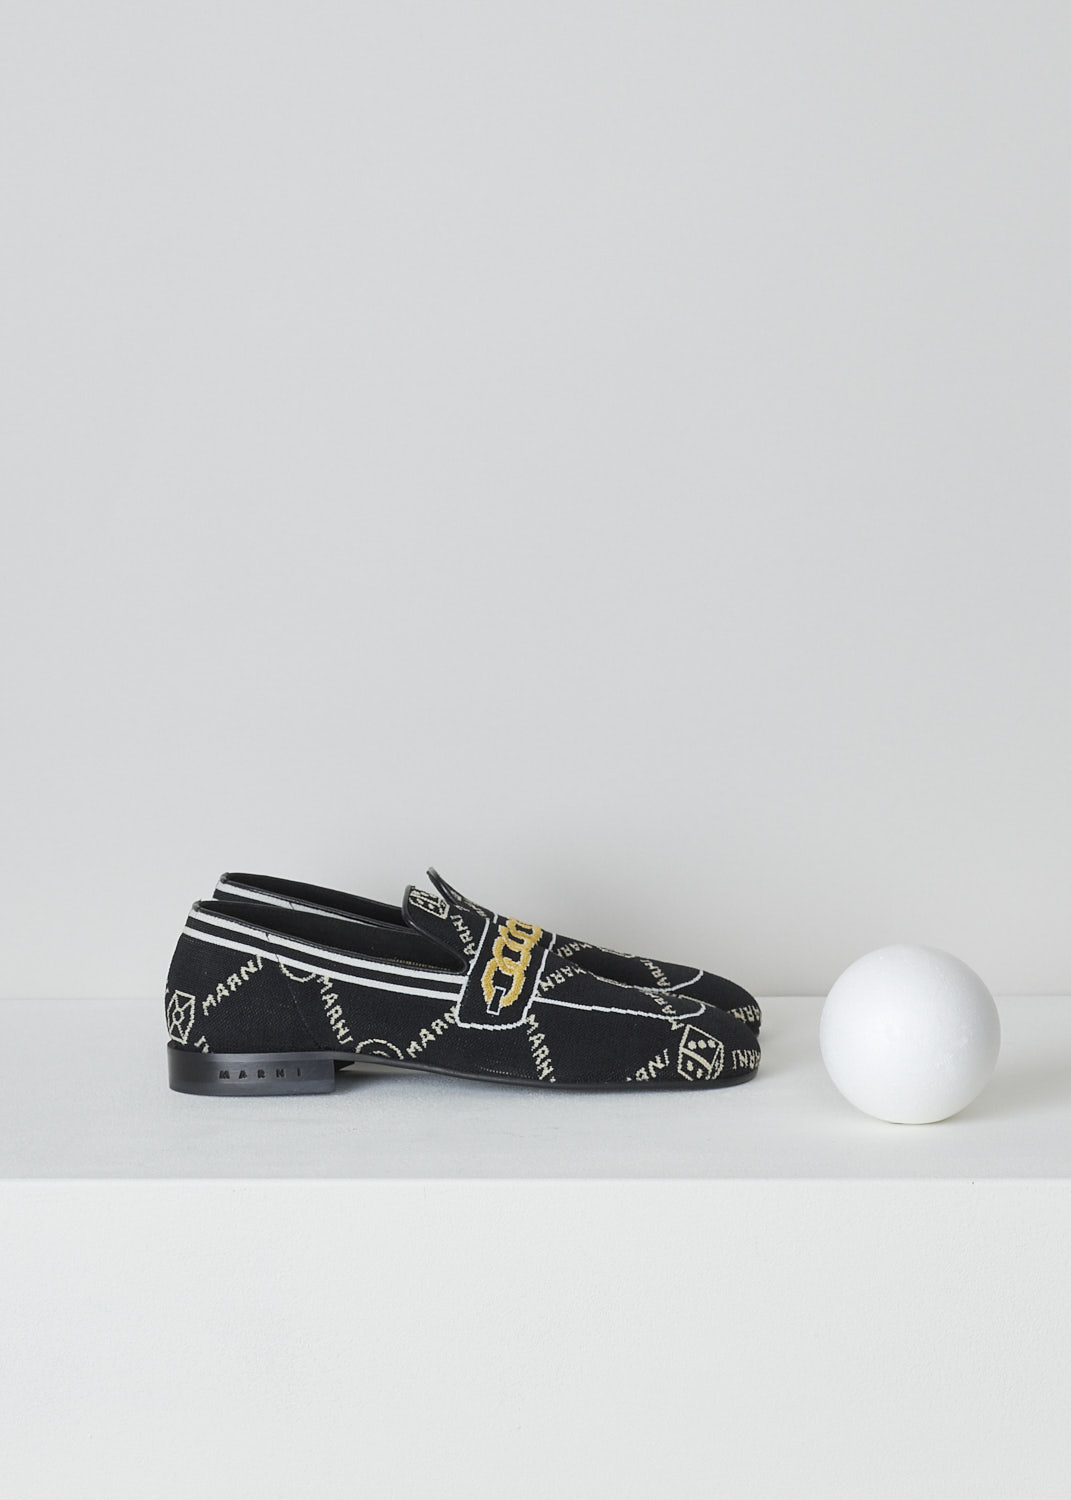 MARNI, BLACK TROMPE L'OEIL JACQUARD MOCCASINS, MOMS003601_P4601_Z2Q23, Black, Side, These black knitted moccasins have a trompe l'oeil image woven into them which depicts a gold chain across the vamp. The brand's logo is woven into them throughout the shoe in white. These moccasins have a round toe and flat rubber sole with a small heel. 
